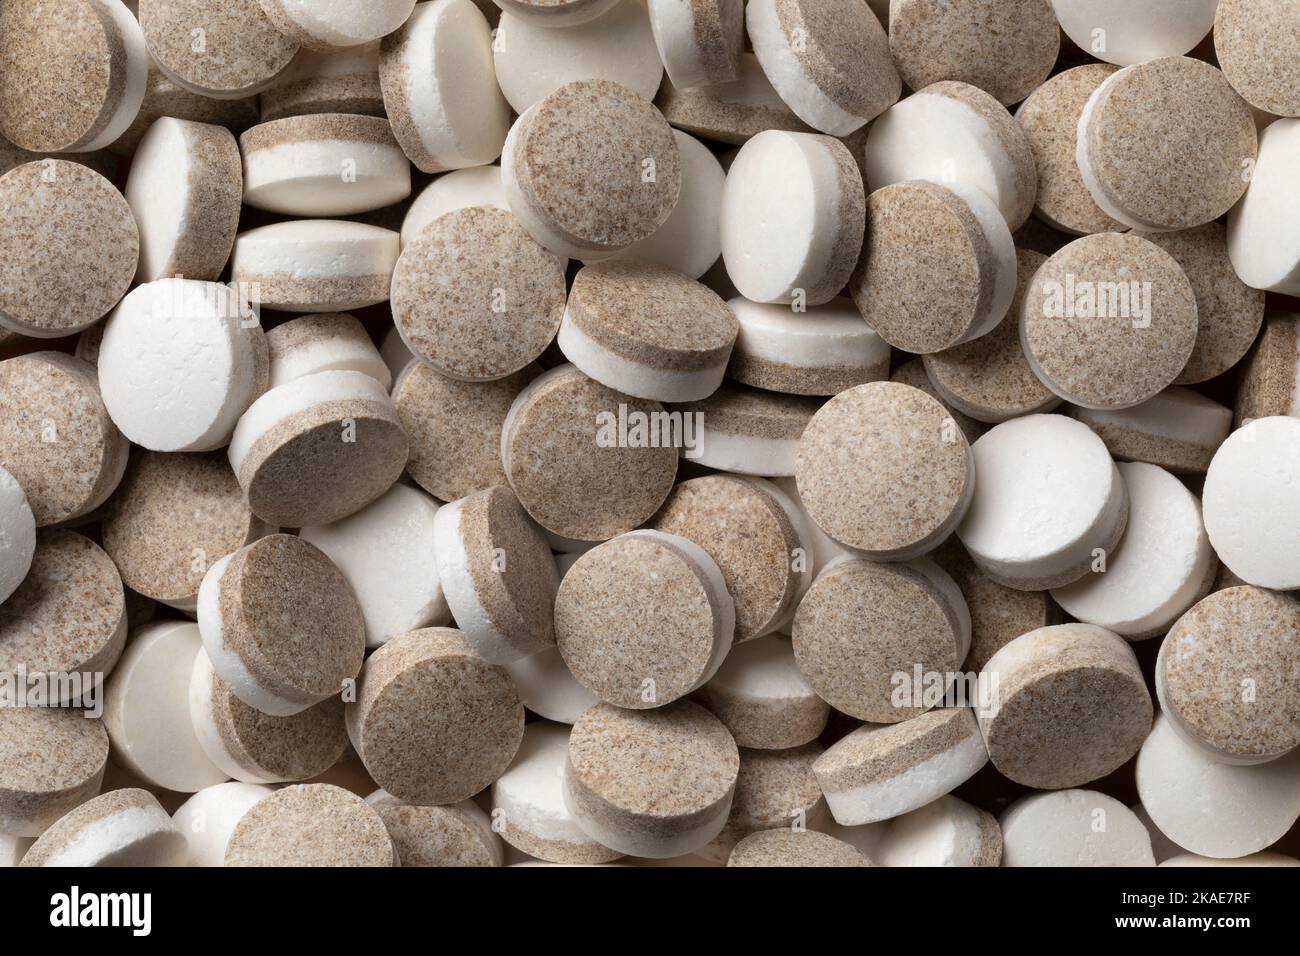 Dutch black and white liquorice pastilles close up full frame as background Stock Photo